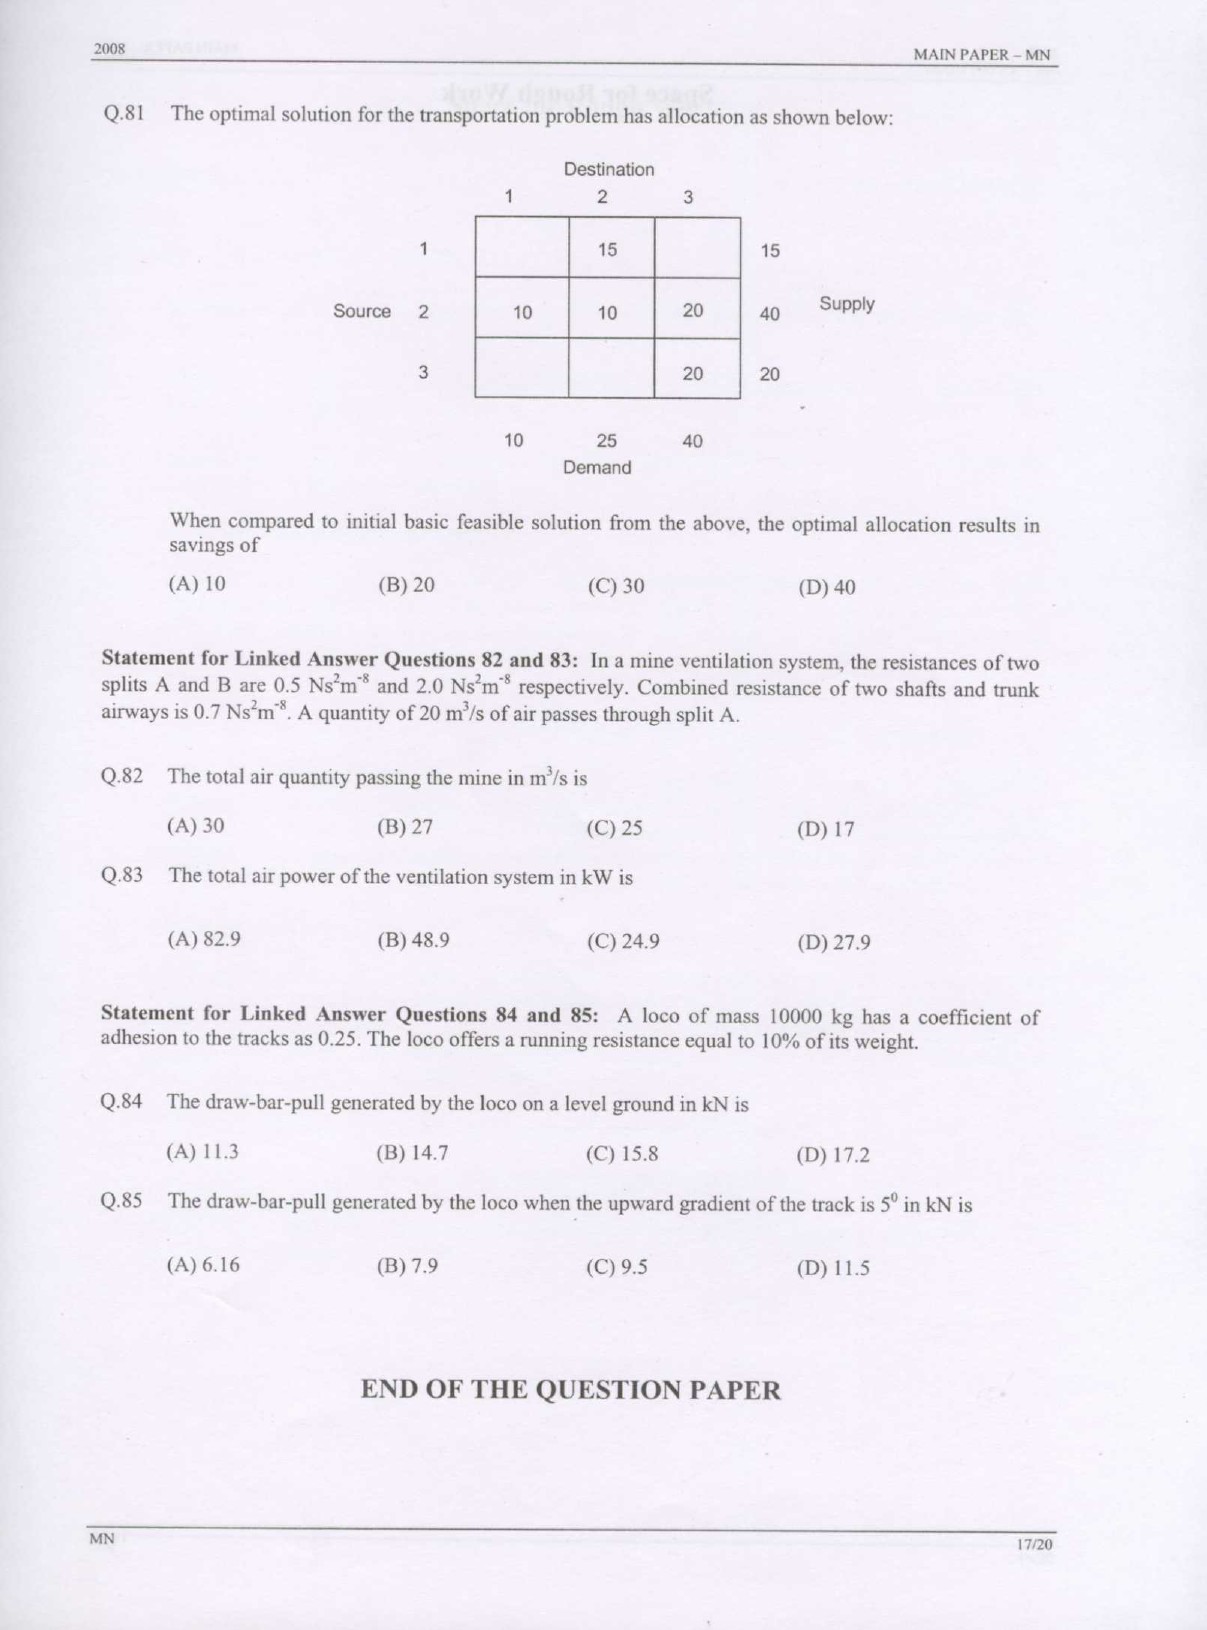 GATE Exam Question Paper 2008 Mining Engineering 17